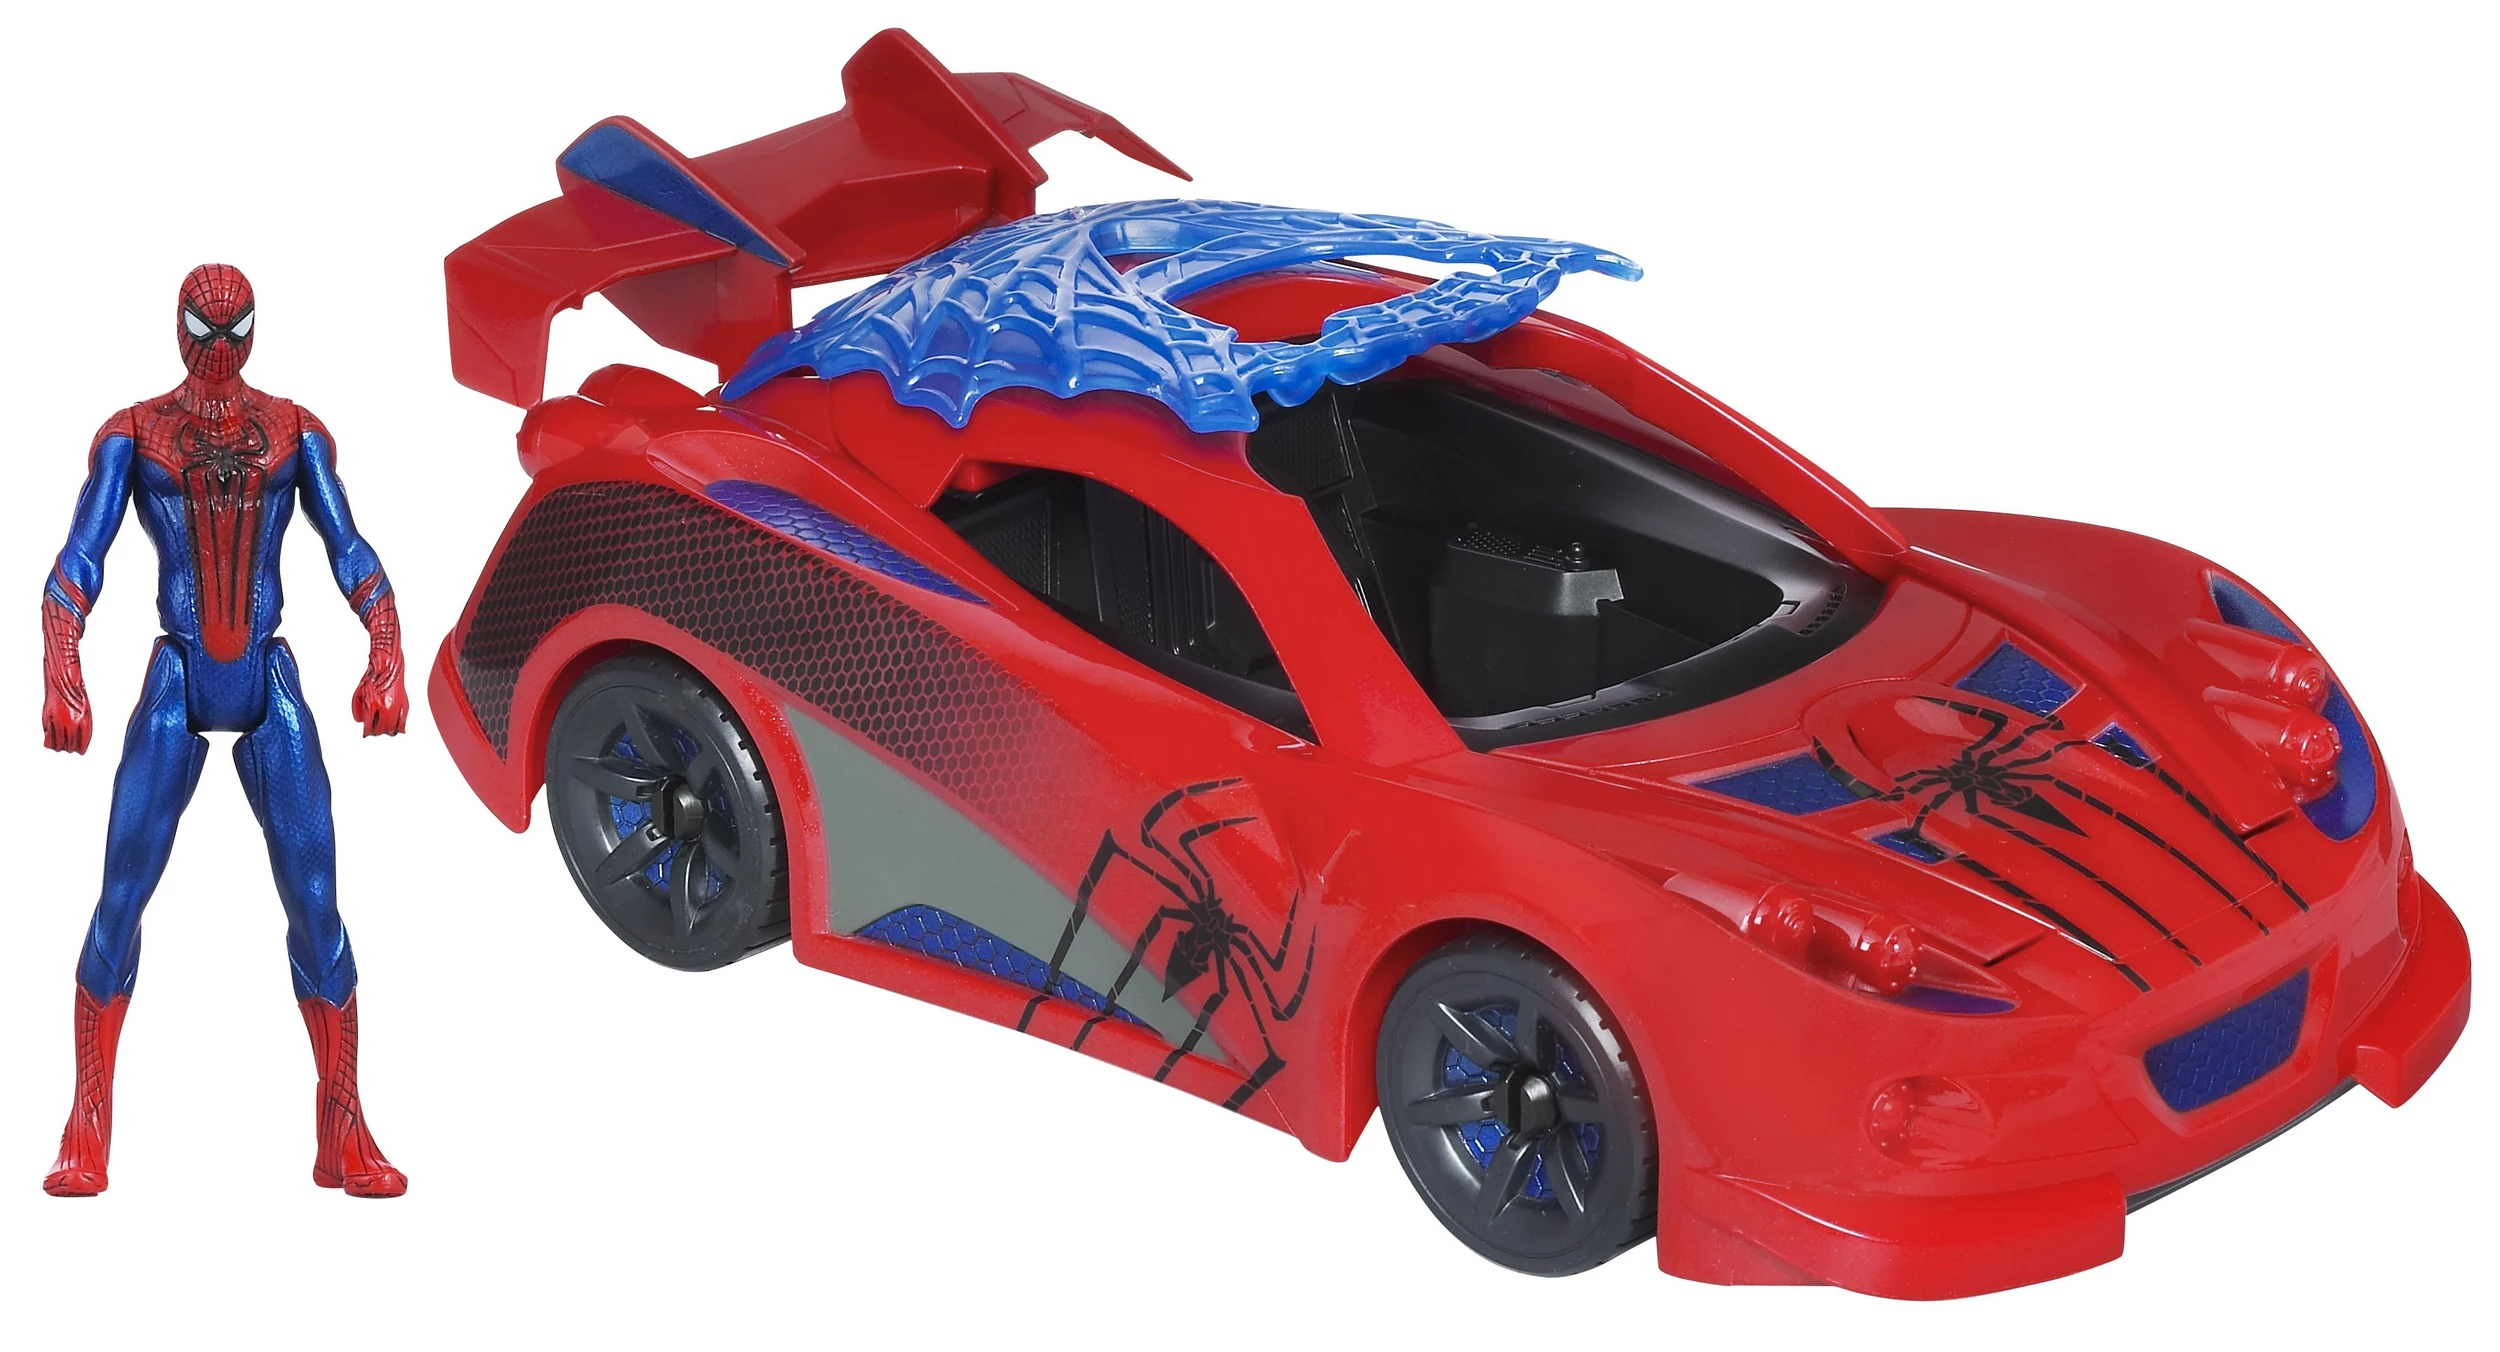 ‘The Amazing SpiderMan’ Movie Toy Images Arrive [Toy Fair 2012]